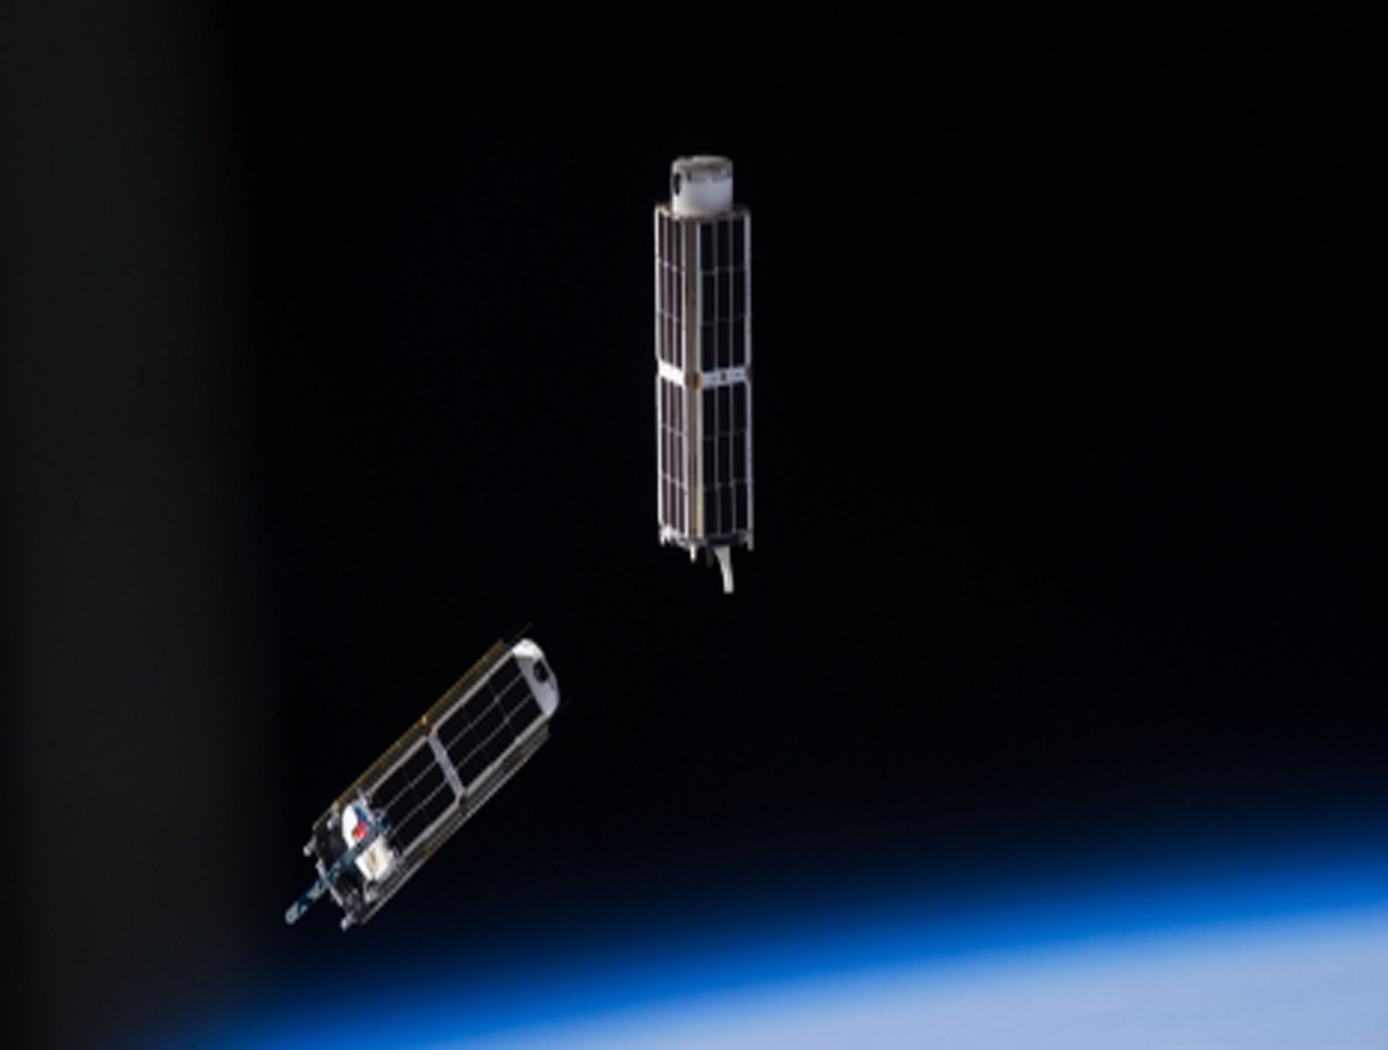 Image of two smallsats in orbit